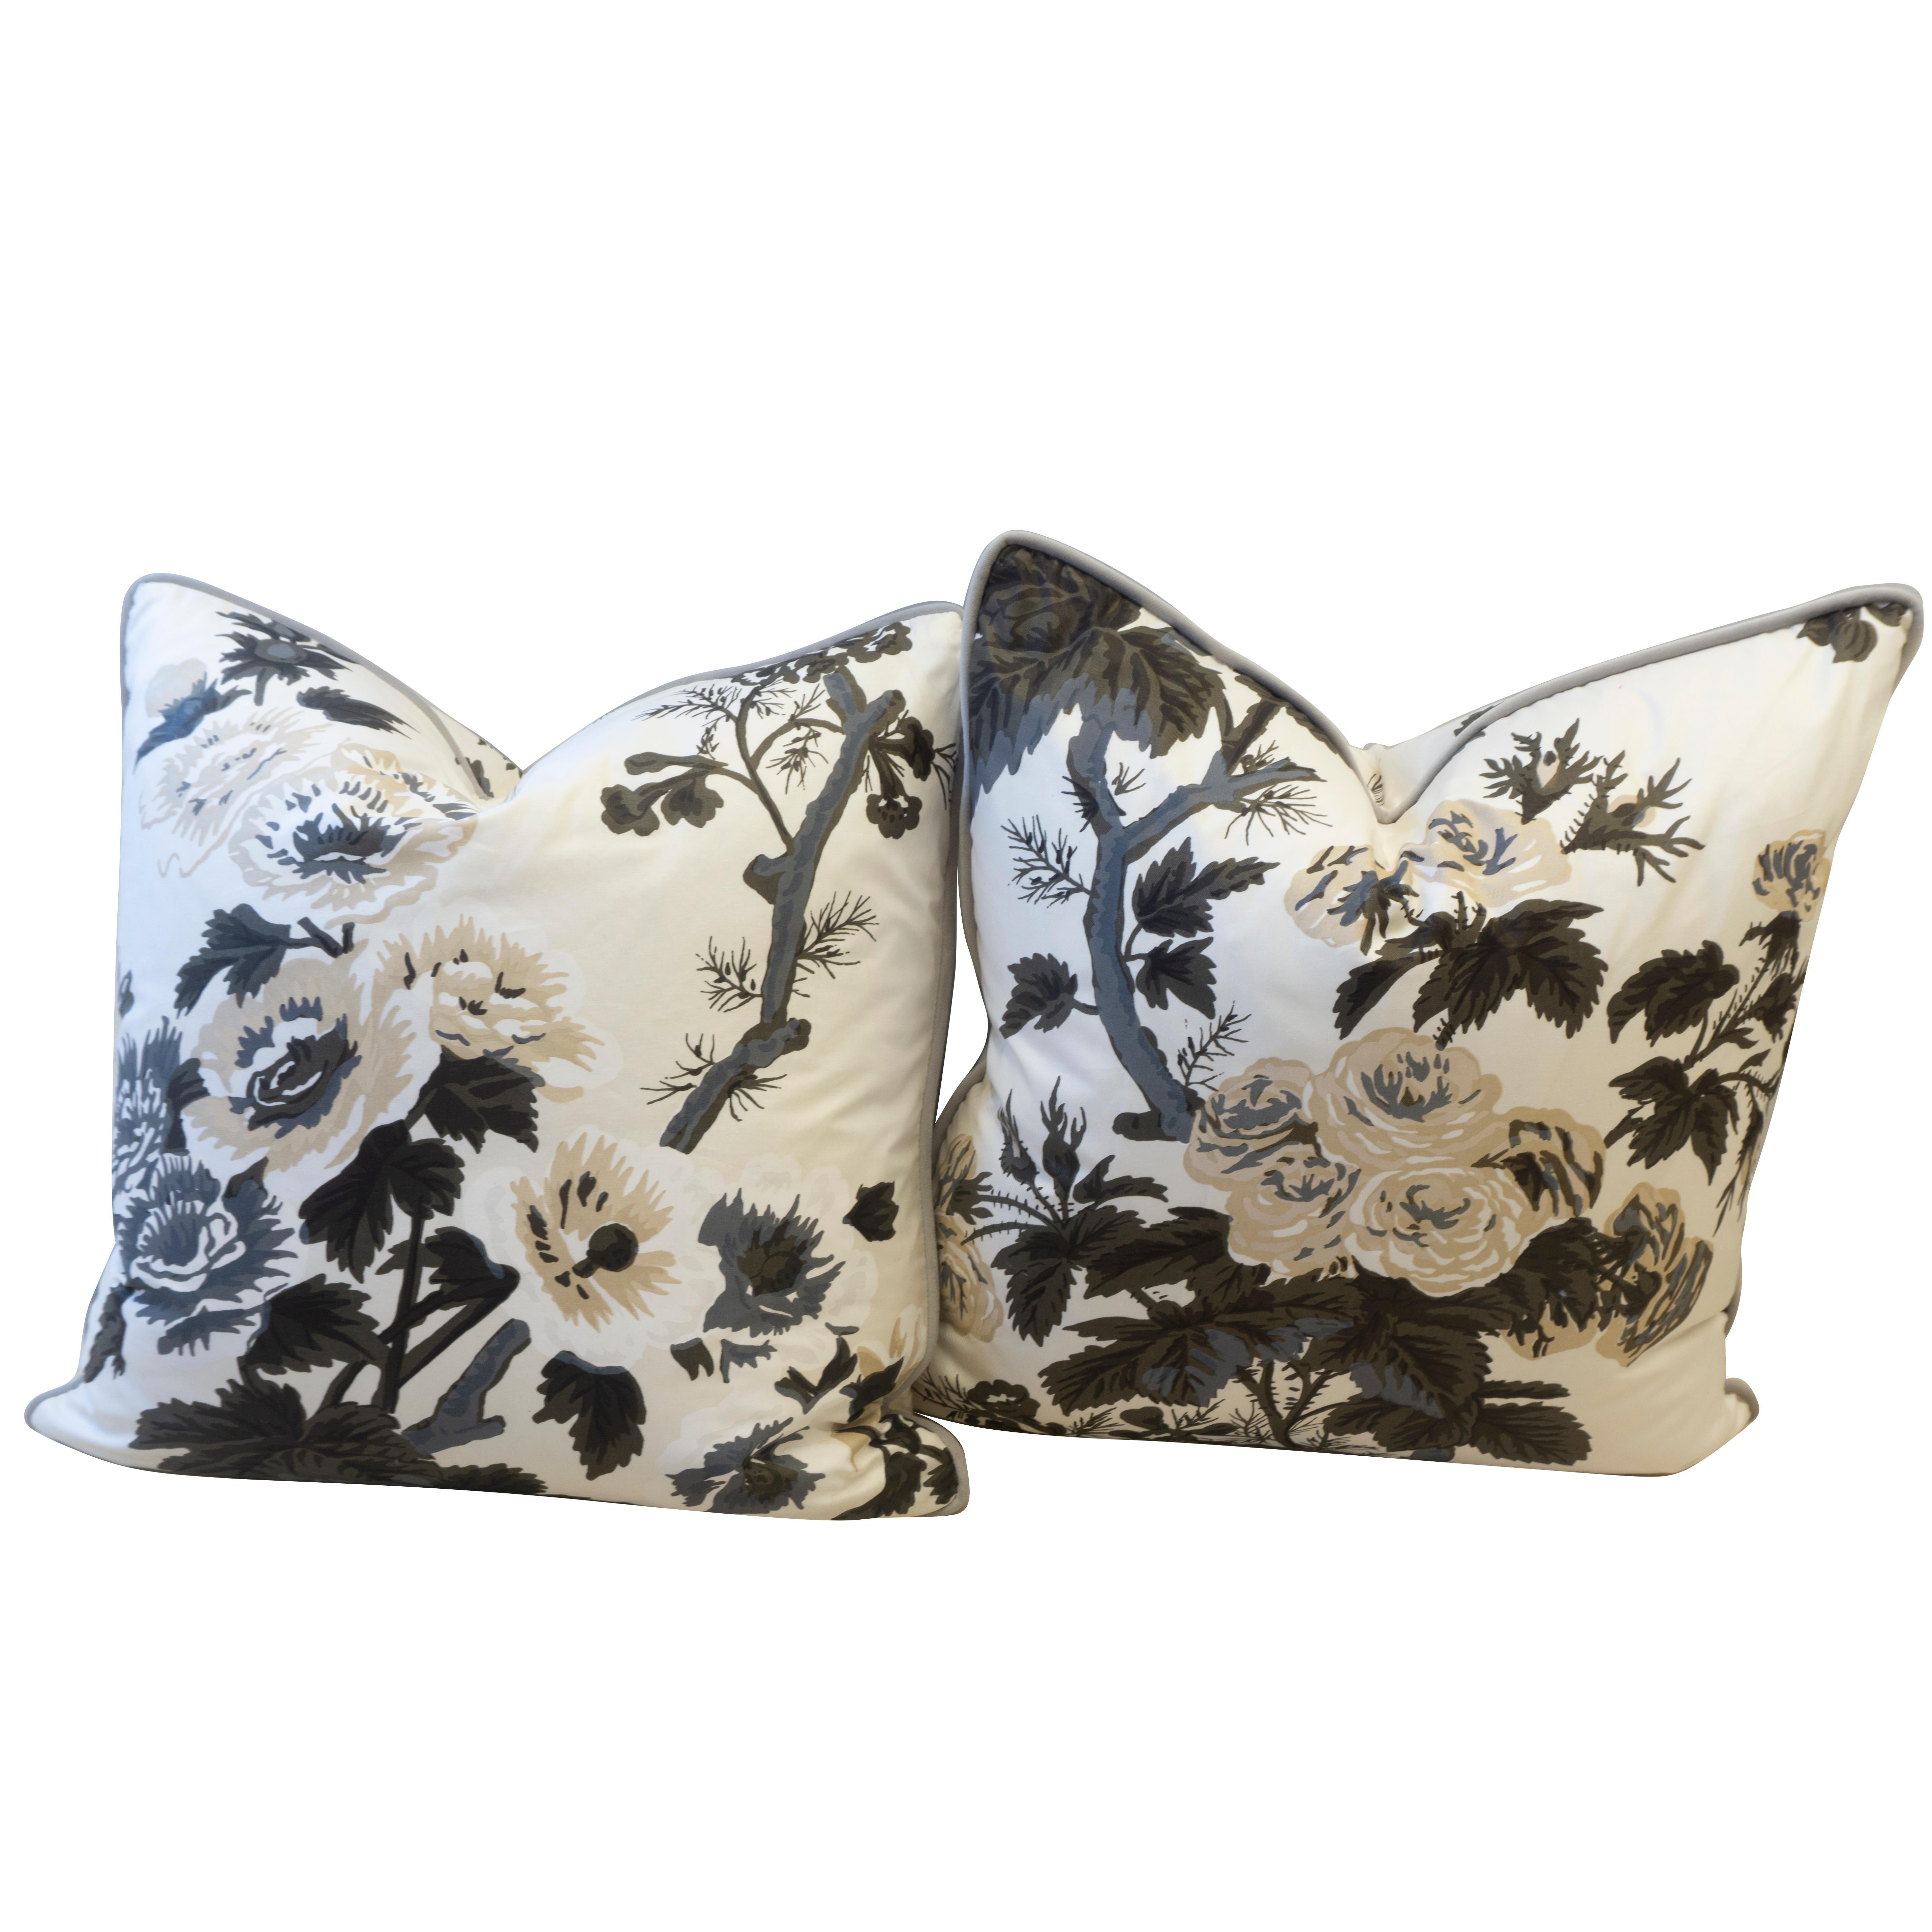 These black and white flower pillows have a vintage look and feature different arrangements of the pattern on each side. All pillows are hand sewn at our studio in Norwalk, Connecticut. 

Measurements: 20